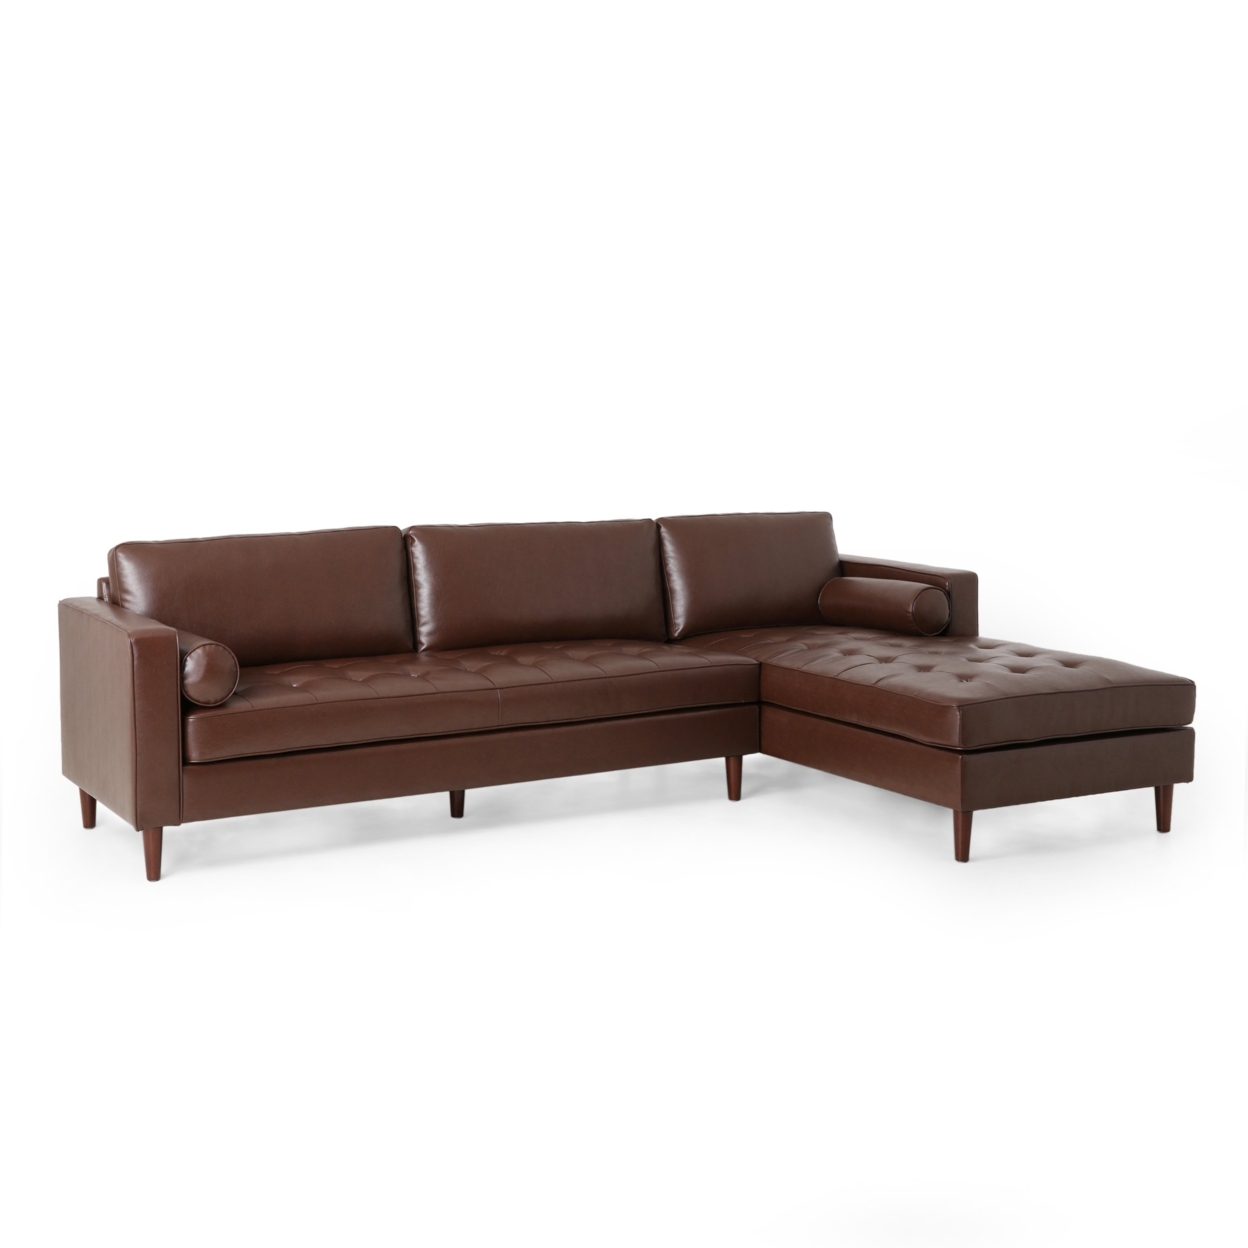 Lockbourne Contemporary Tufted Upholstered Chaise Sectional - Espresso/dark Brown